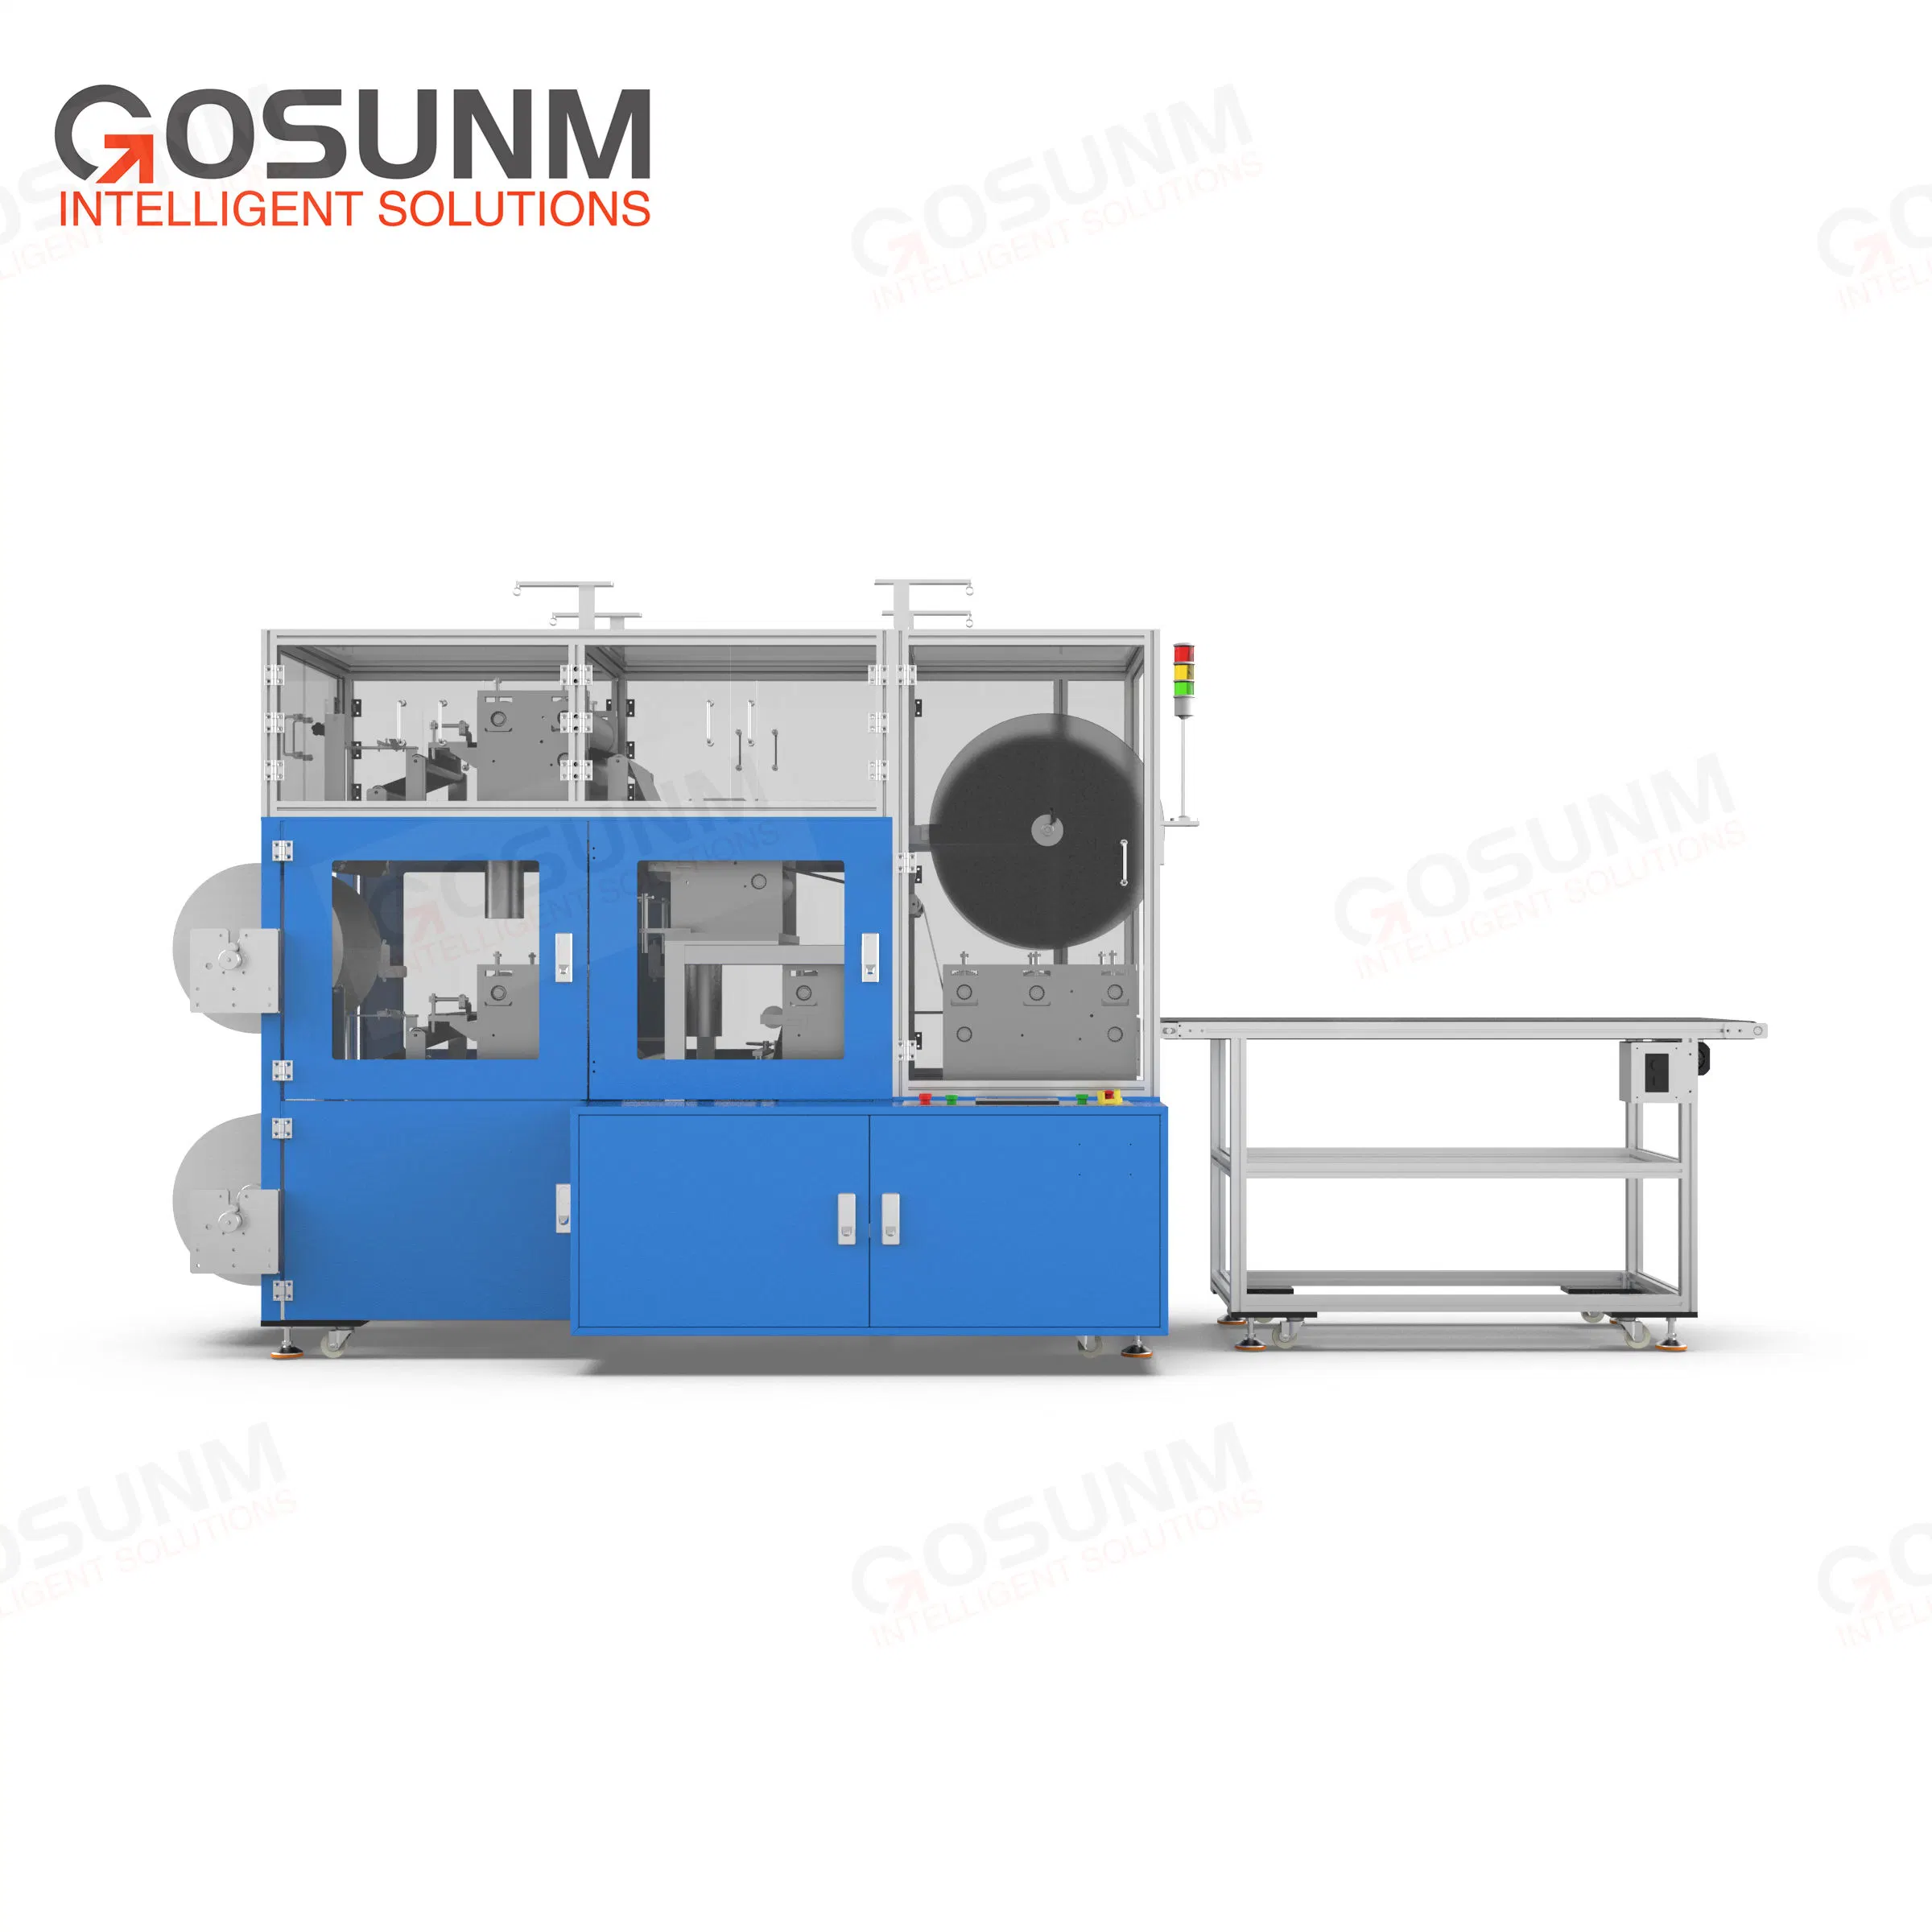 Gosunm Fully Automatic Dust-Proof Non-Woven Shoe Cover Making Machine